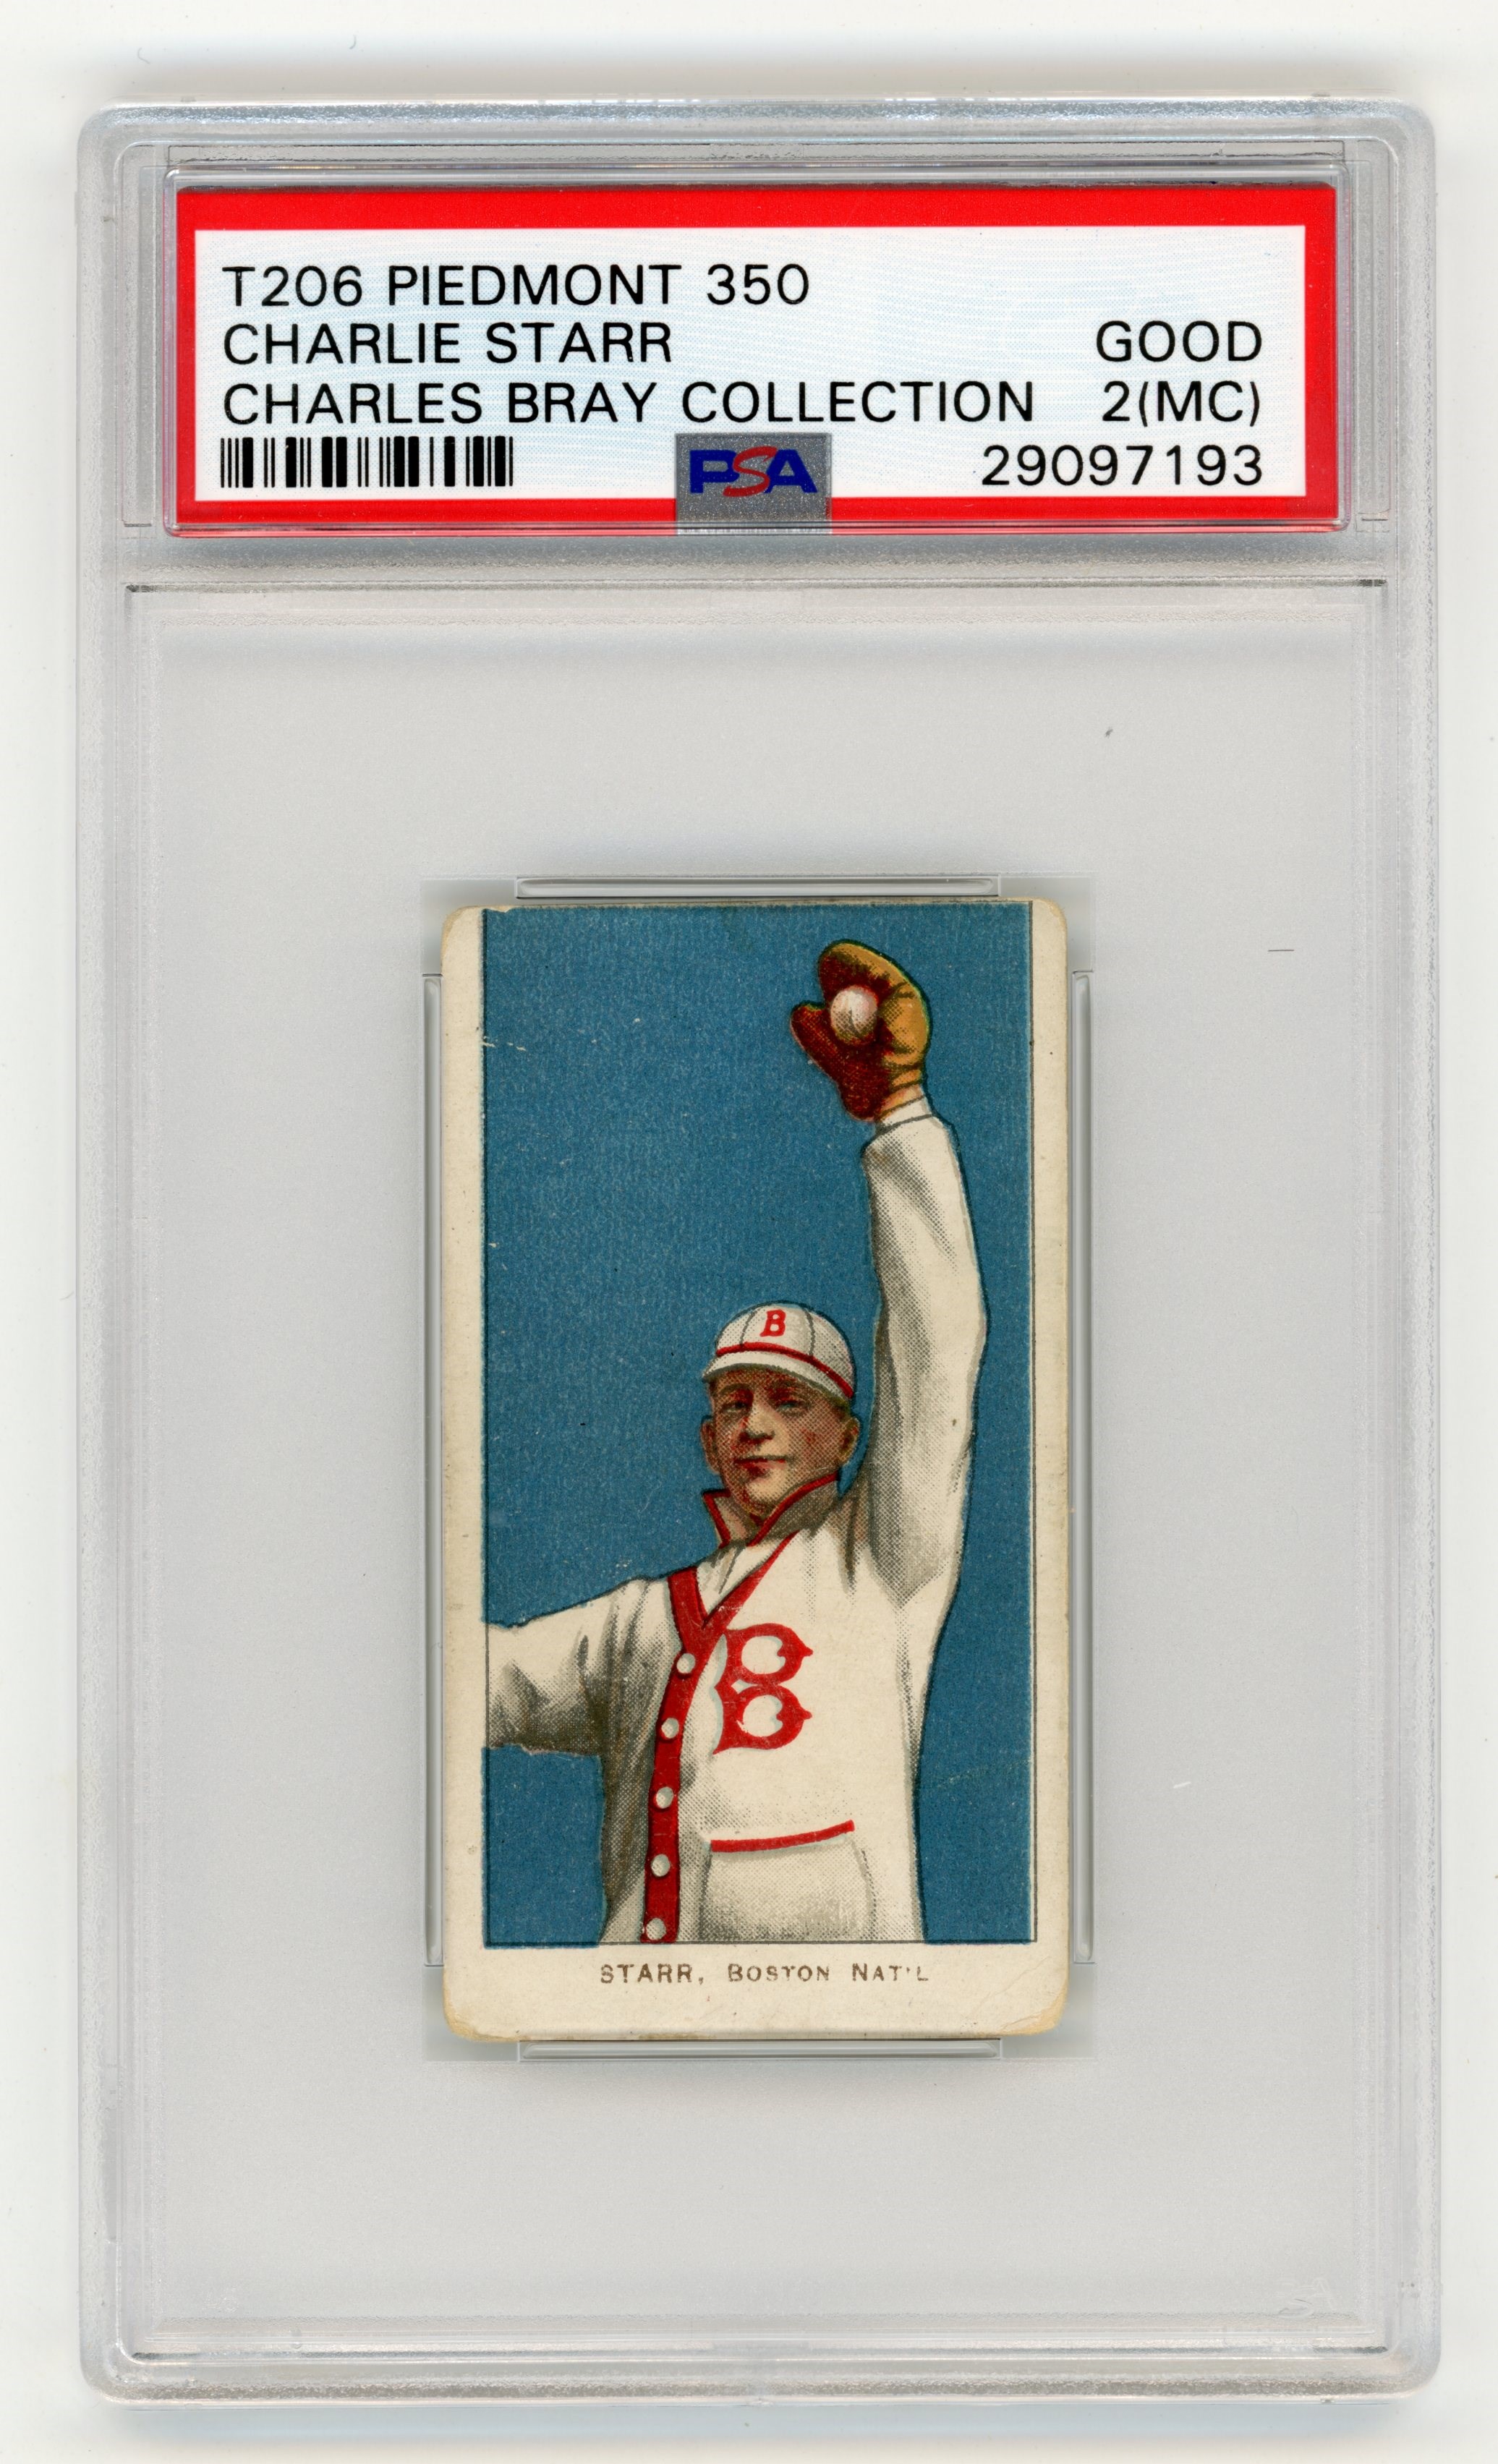 Baseball and Trading Cards - T206 Piedmont 350 Charlie Starr  PSA GOOD 2 (MC) From the Charles Bray Collection.